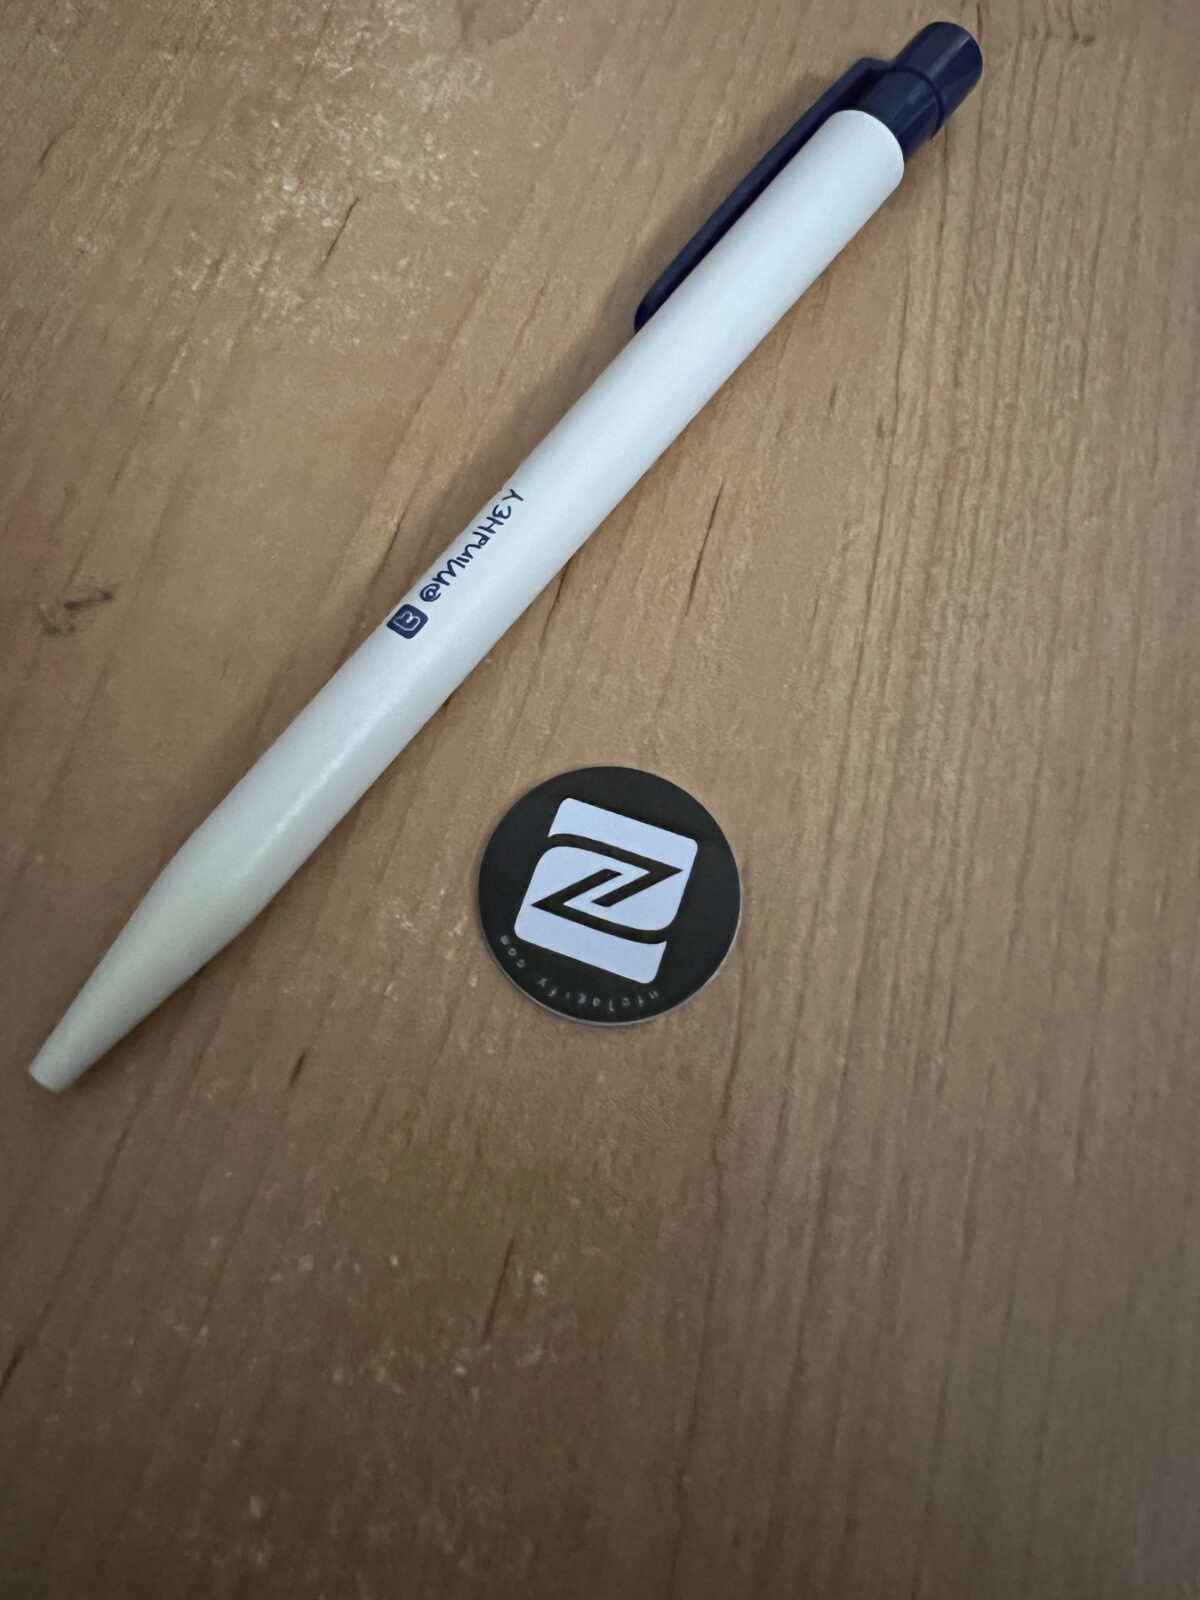 A pen next to an NFC tag that can be used to trigger Apple Shortcuts